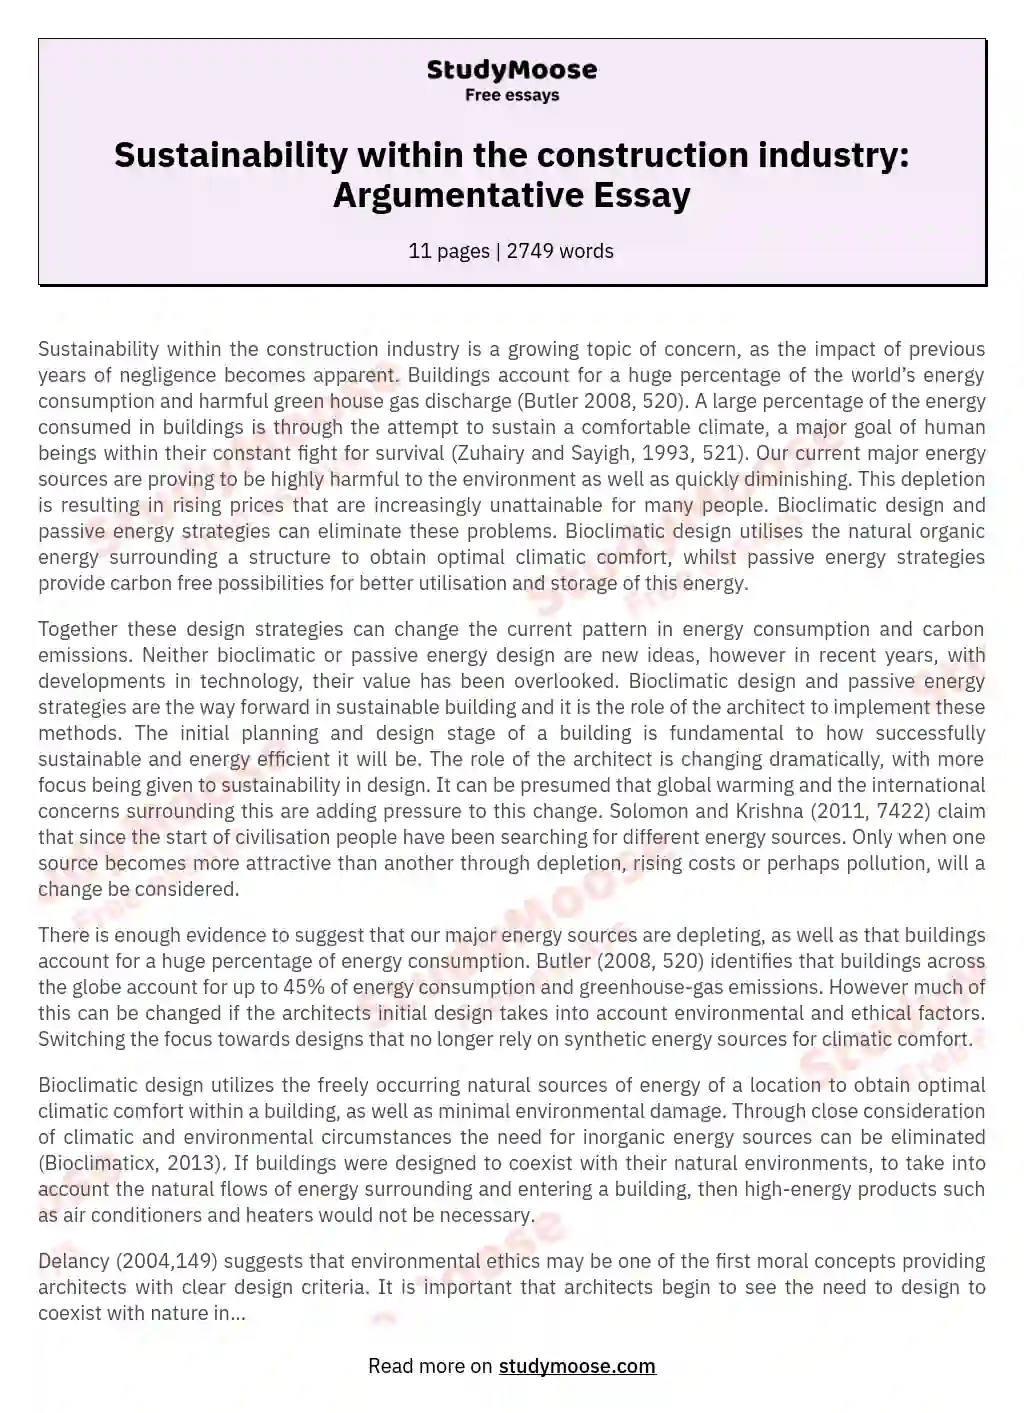 Sustainability within the construction industry: Argumentative Essay essay